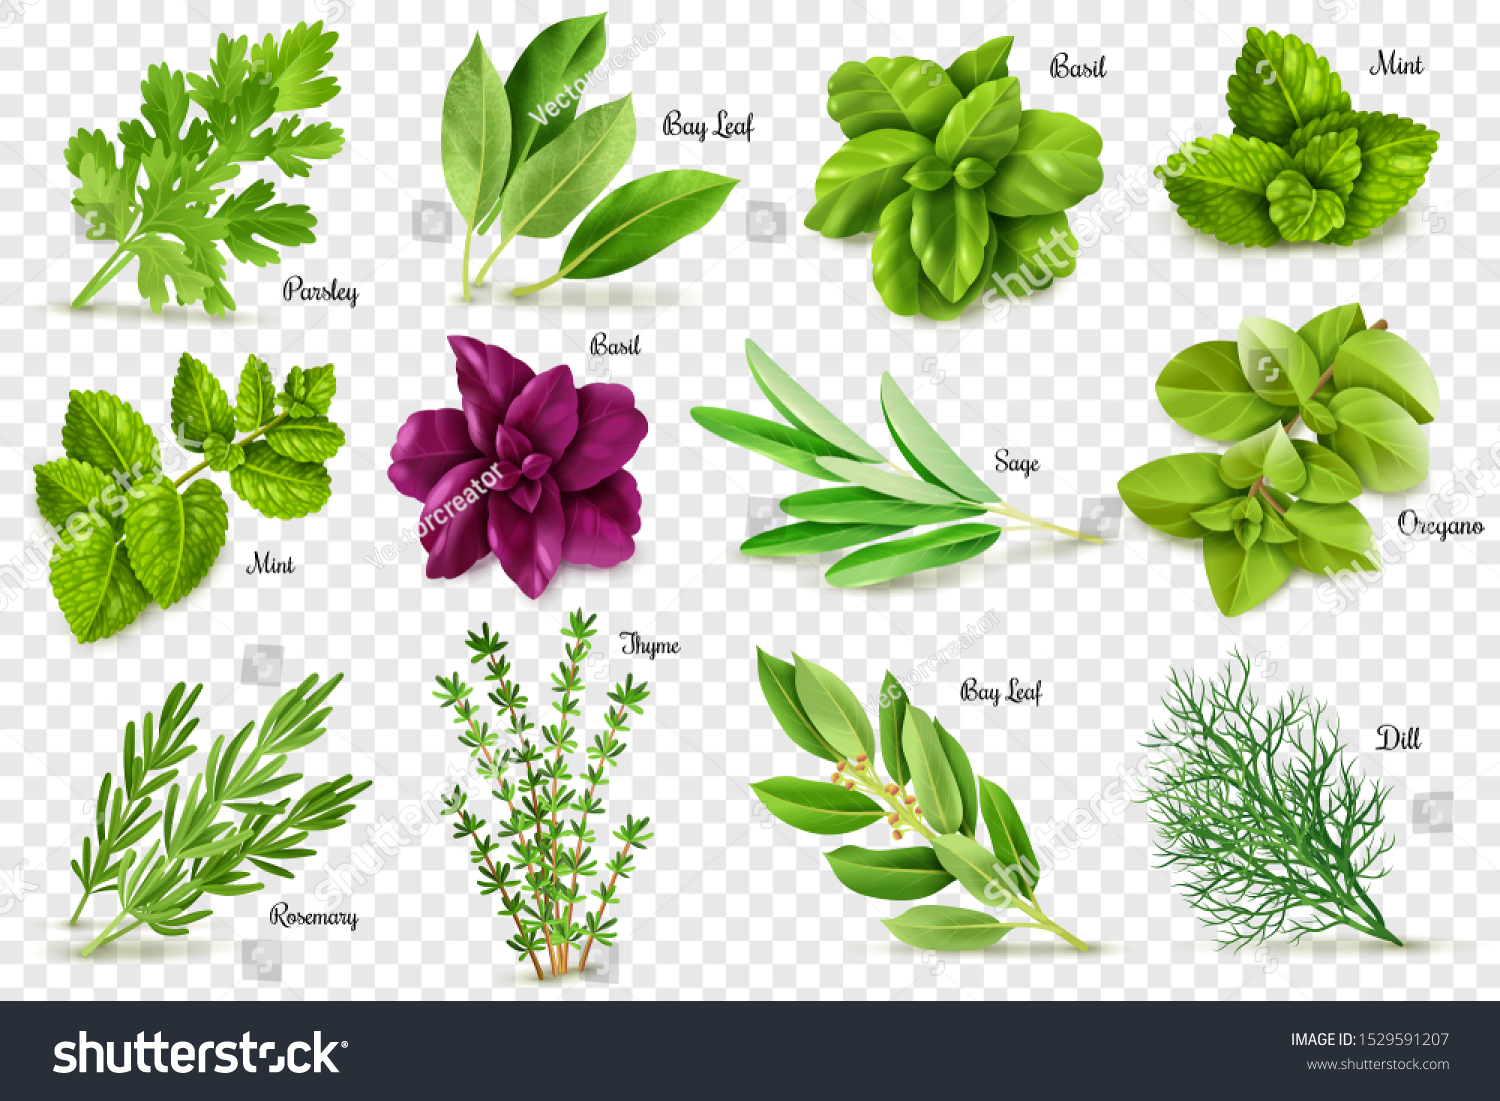 A large set of herbs on a transparent background, isolated objects, popular culinary plants, natural health care, mint and rosemary, basil, thyme, parsley, dill, bay leaf, oregano and sage #1529591207